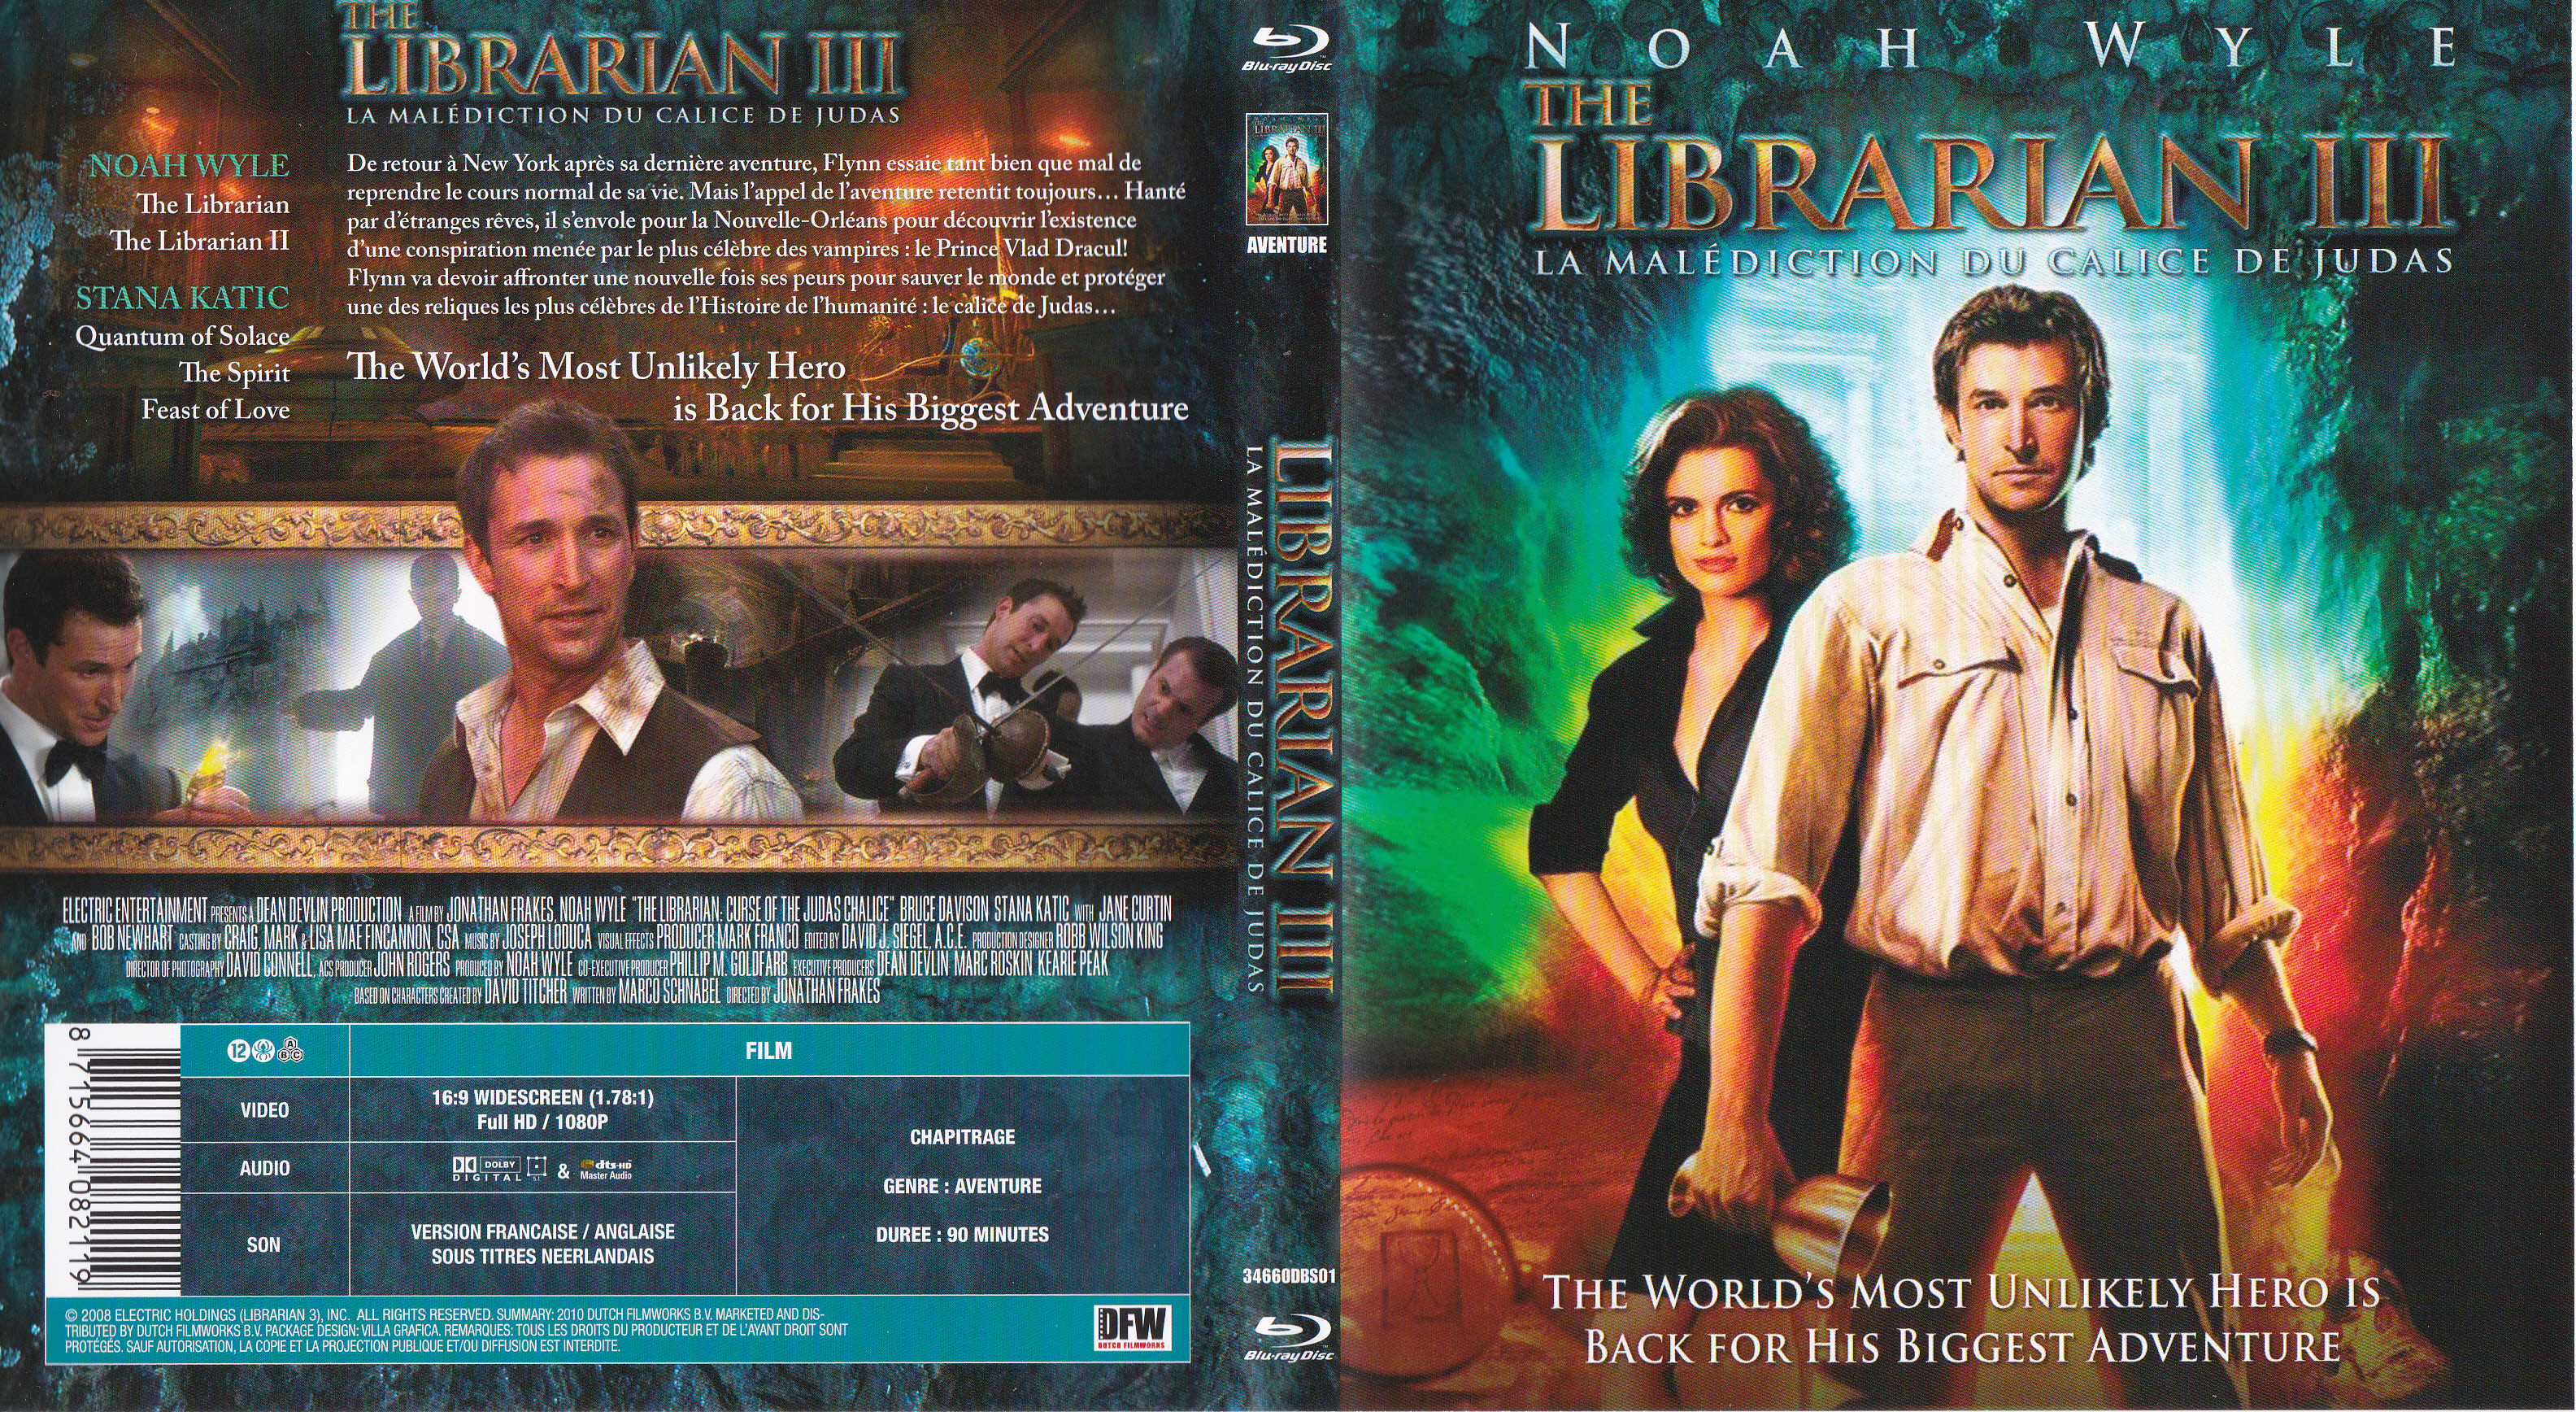 Jaquette DVD The librarian 3 (BLU-RAY)